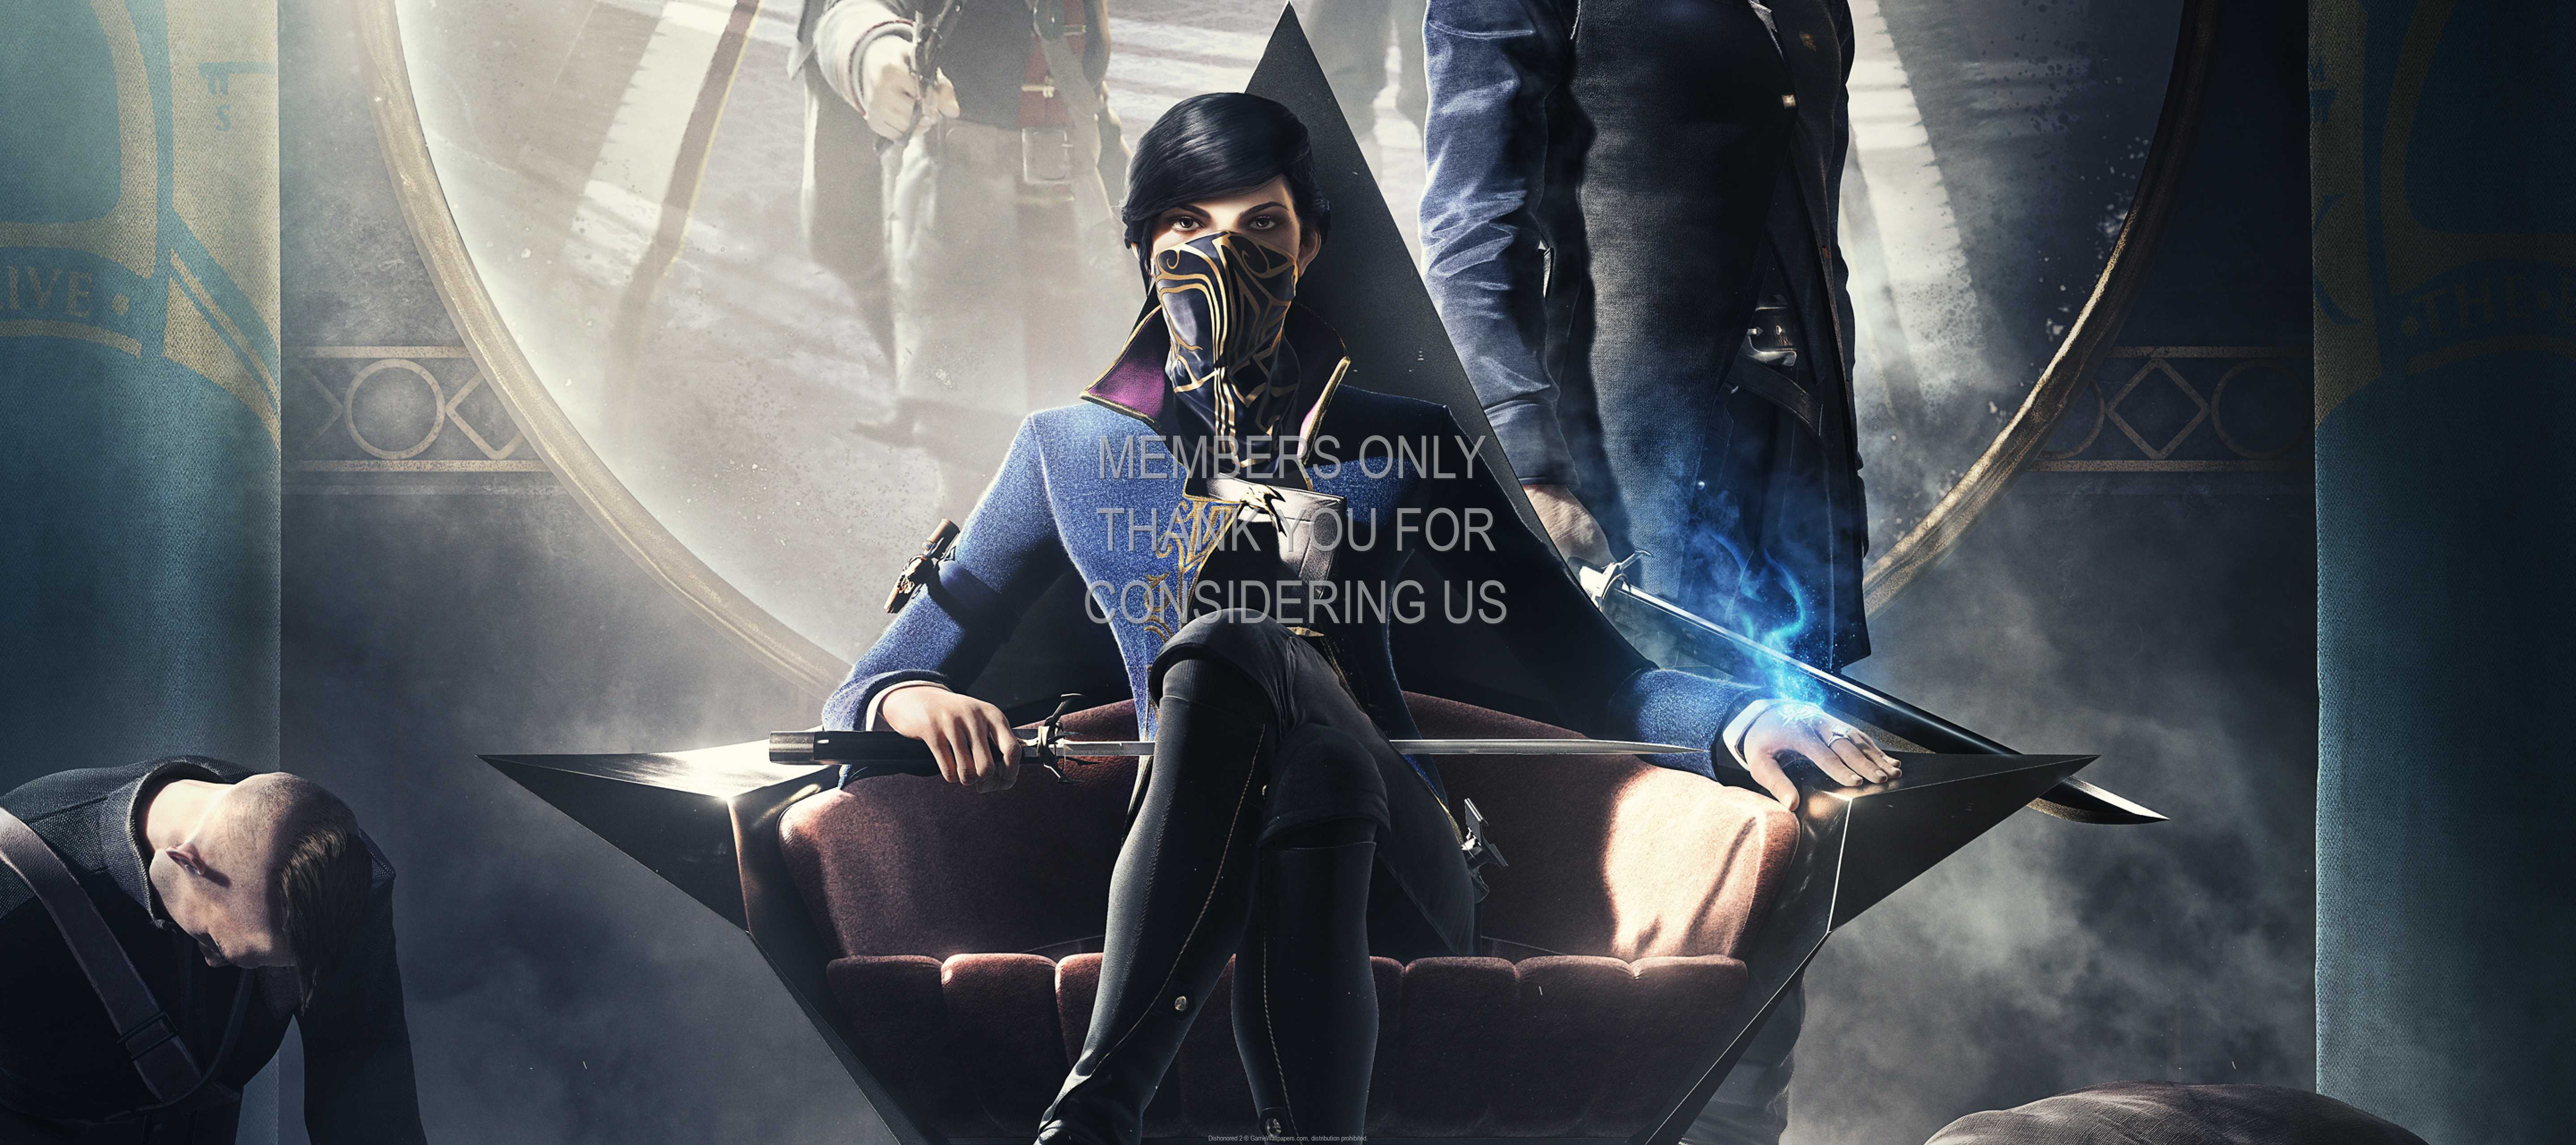 Dishonored 2 1440p%20Horizontal Mobile wallpaper or background 08